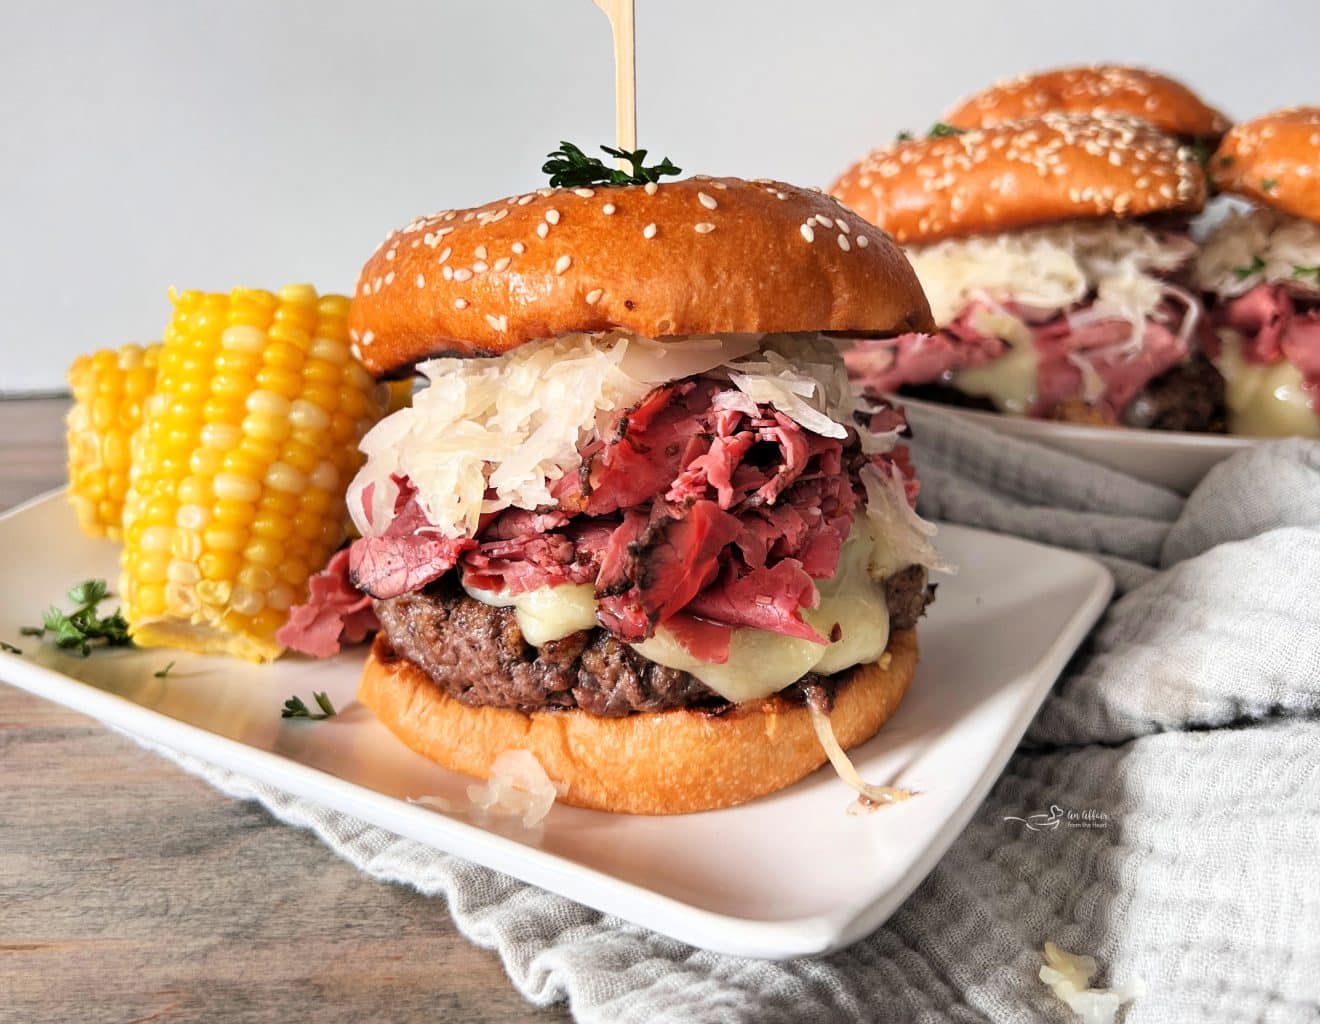 Pastrami Burger with Kraut on a white plate with corn and with burgers behind it